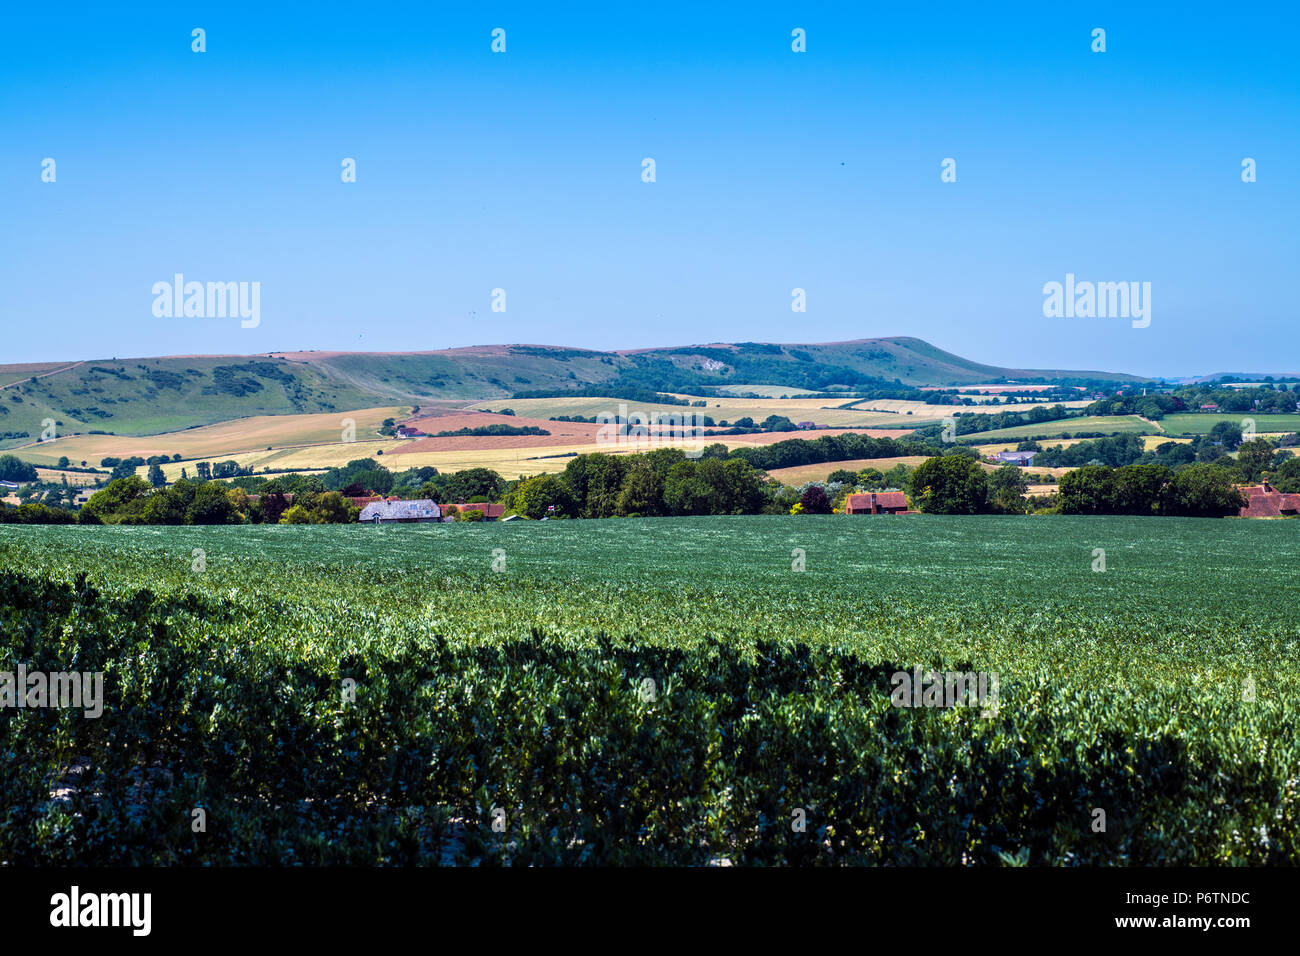 View of Firle Beacon in East Sussex, England across well-maintained bean crop fields Stock Photo